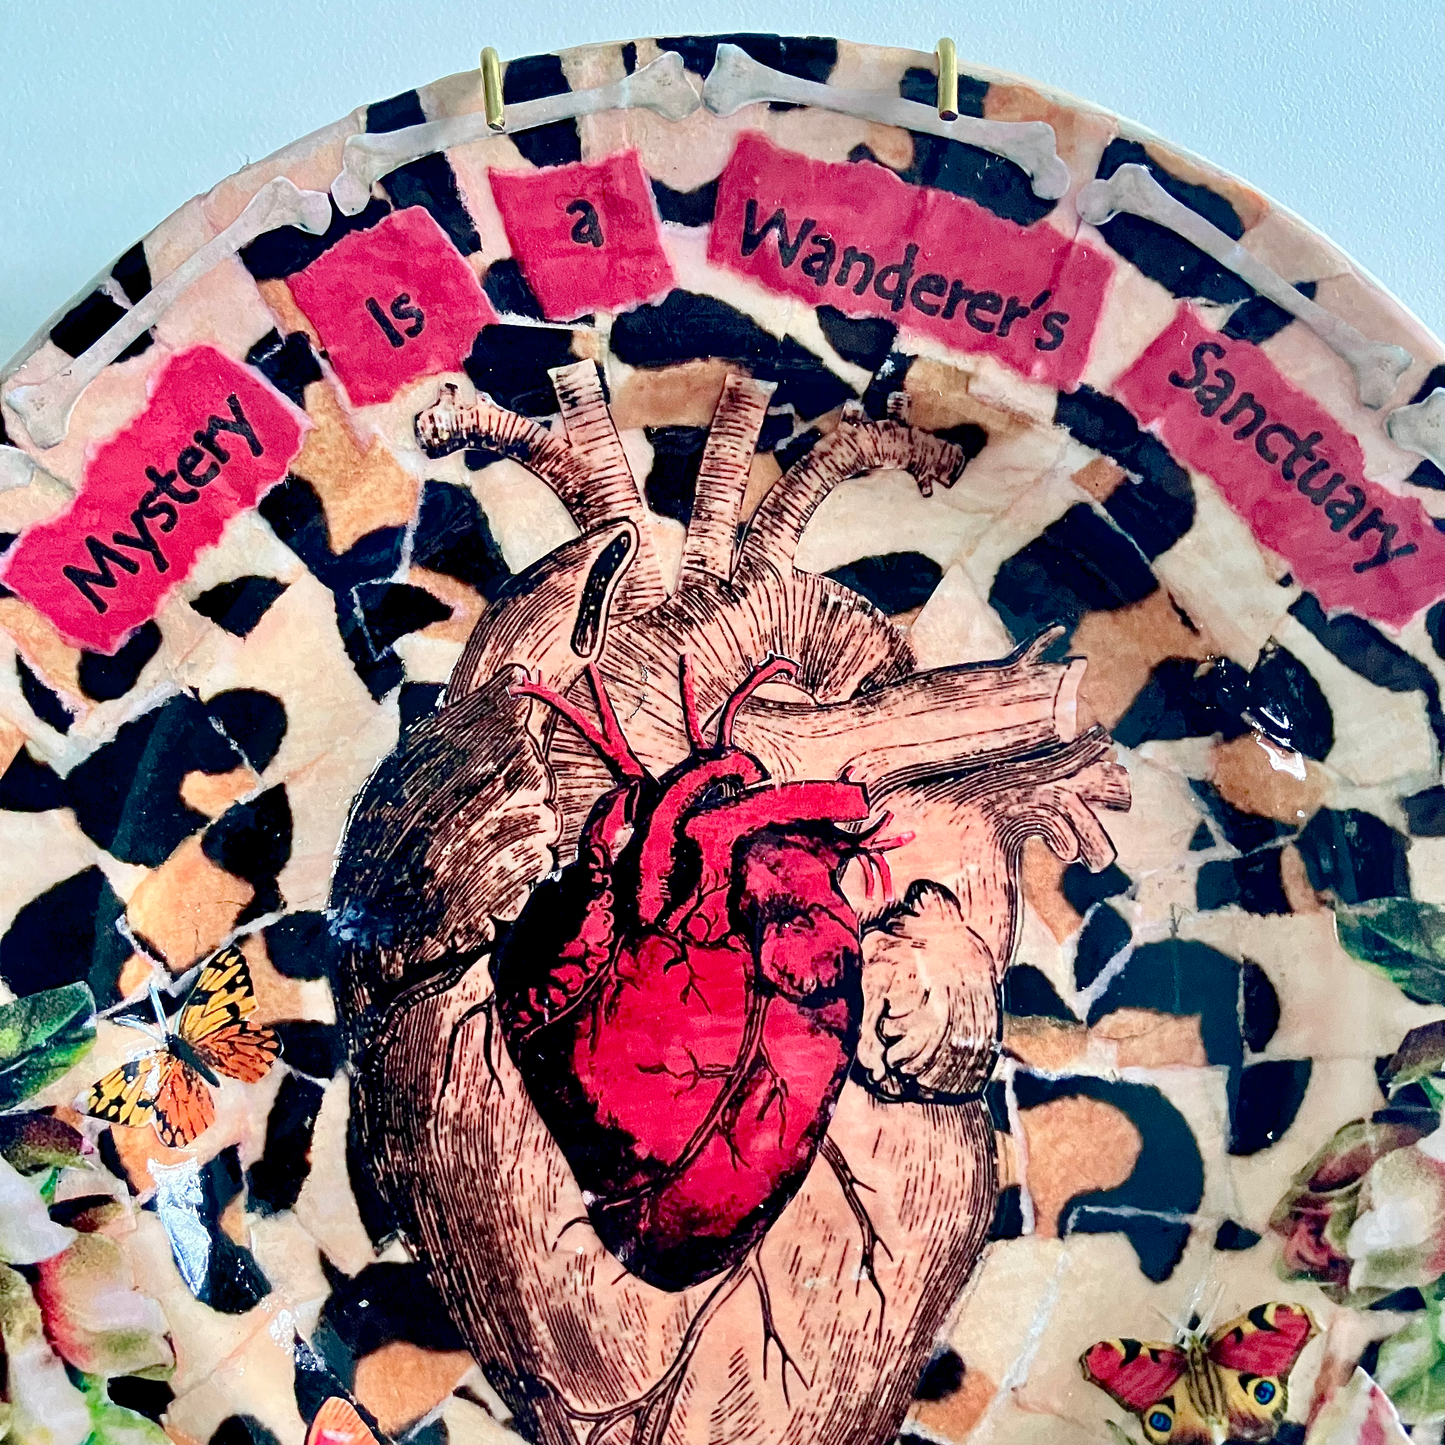 Mystery is a Wanderer's Sanctuary Wall Plate by House of Frisson, closeup detail of the collage showing two anatomical human heart illustrations against a leopard print pattern.